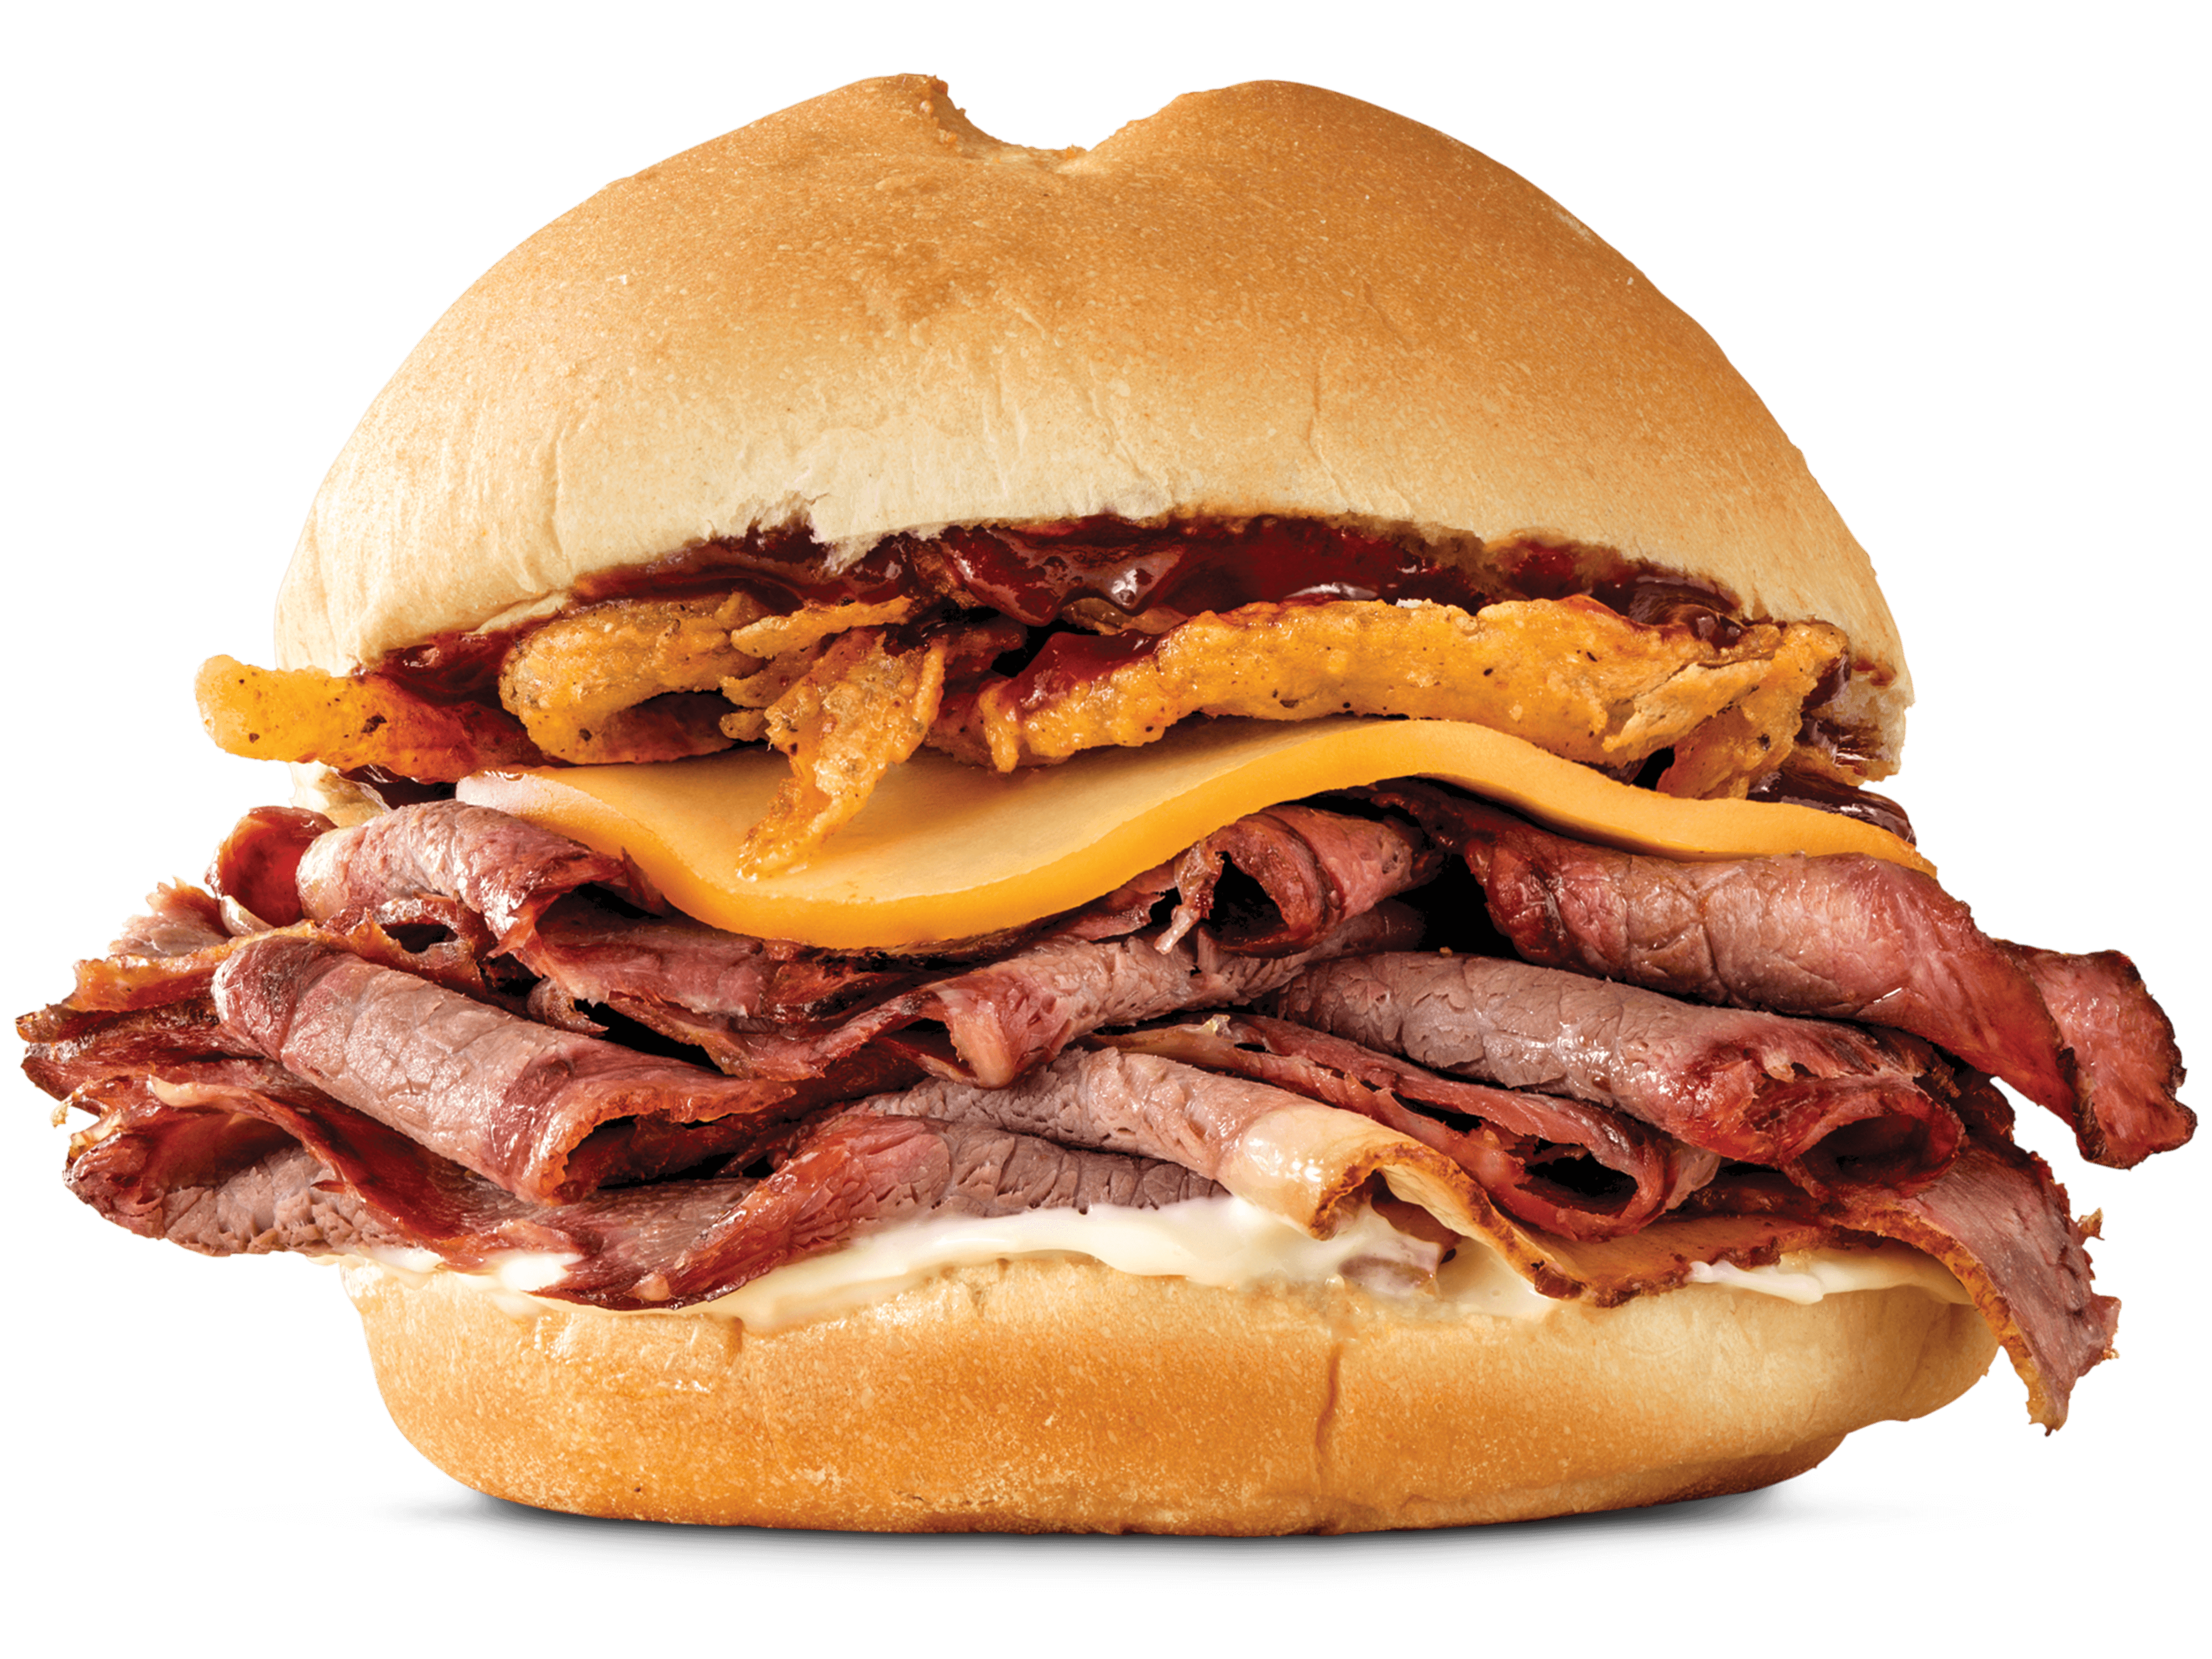 Calories in Arby's Smokehouse Brisket